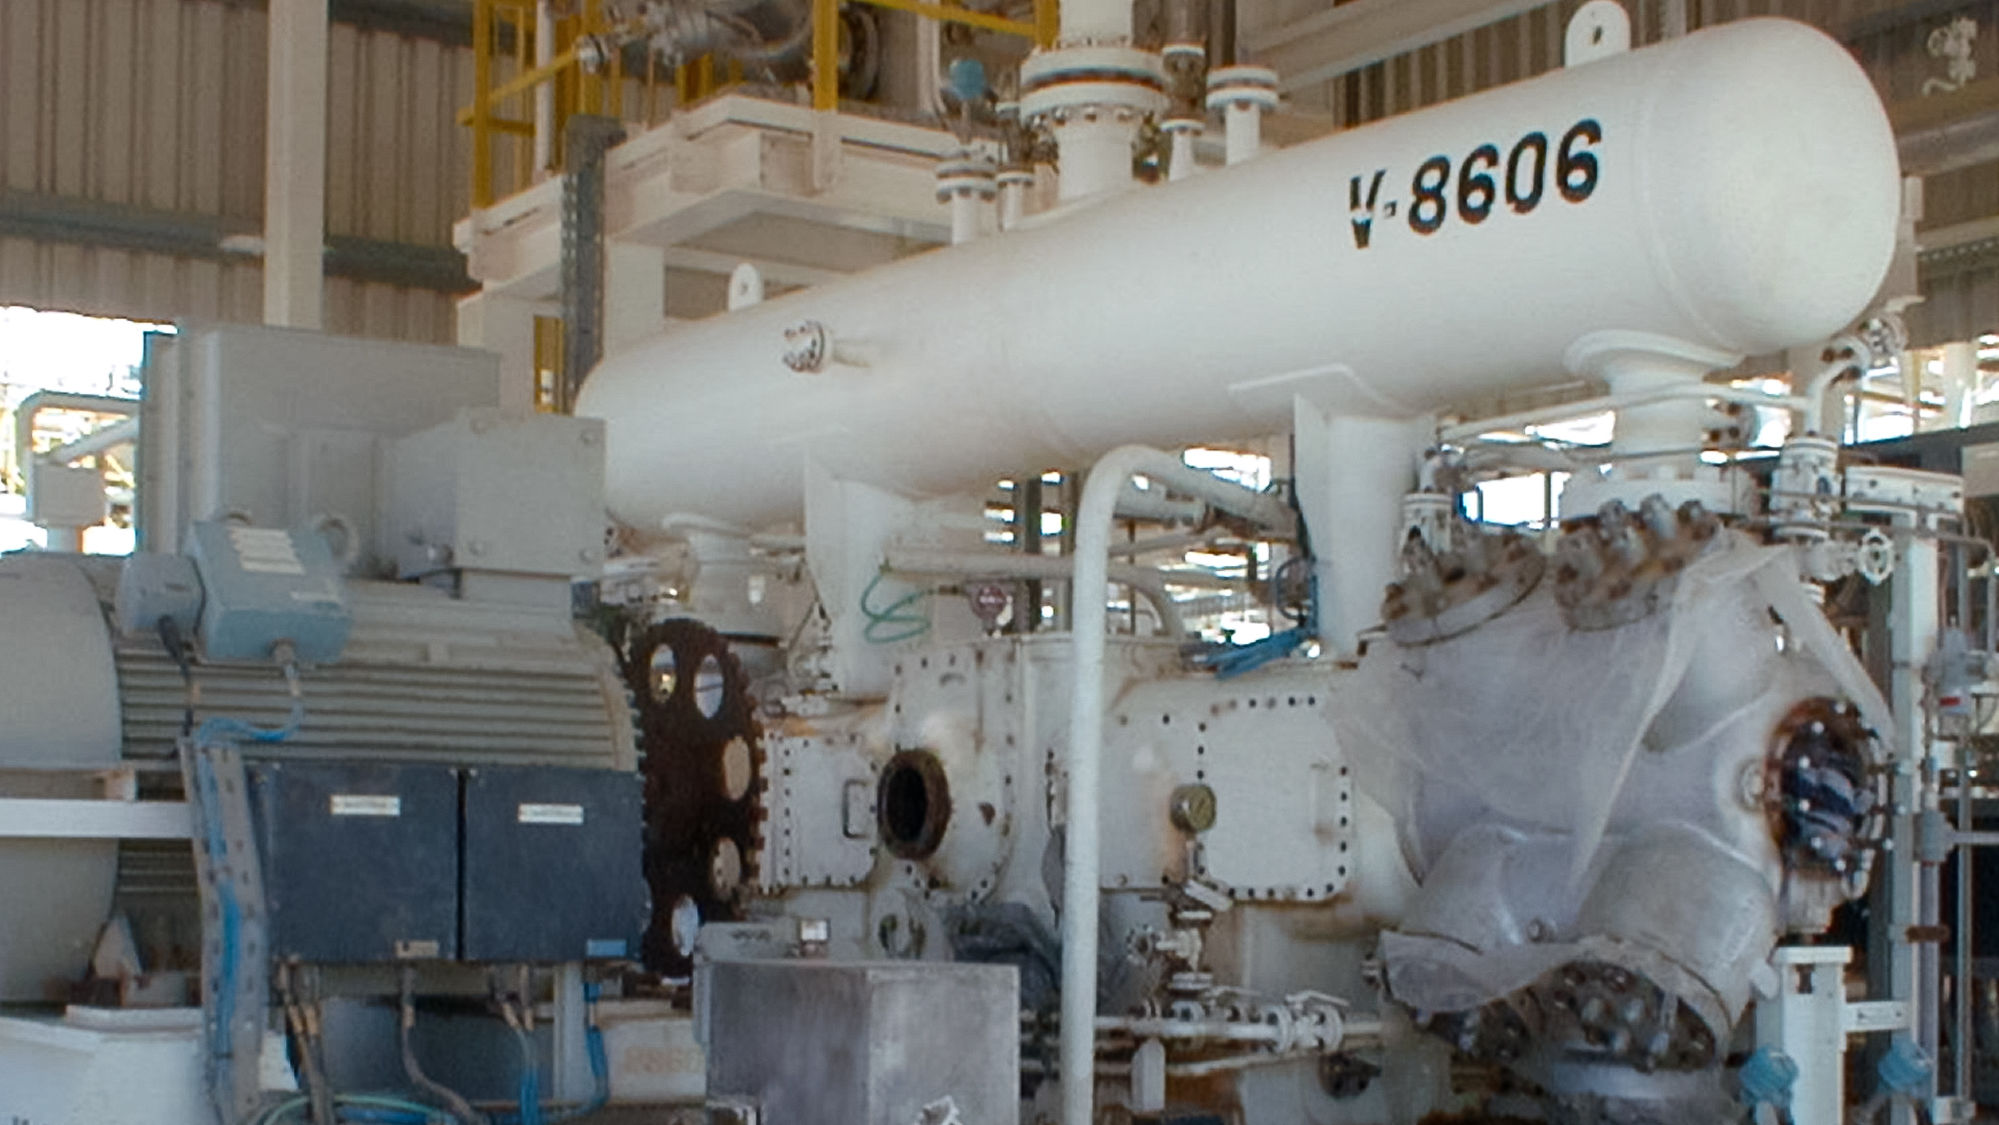 A white, high-speed reciprocating compressor in boxer design with pulsation tank, motor as well as flywheel can be seen. The photo was taken during maintenance of the off-gas compressor at the customer's plant.